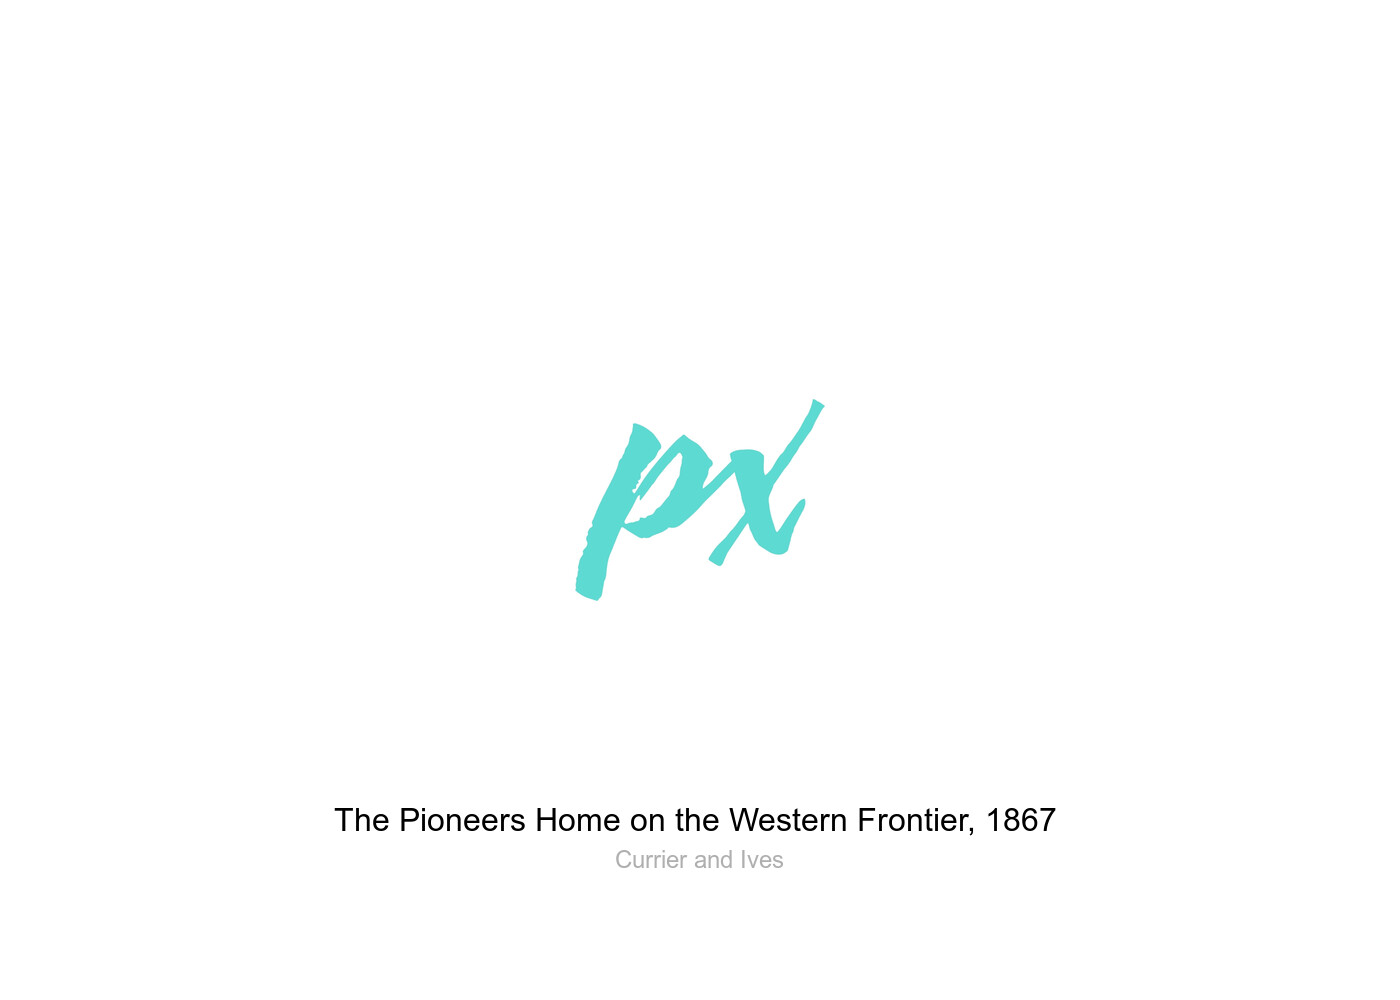 The Pioneers Home on the Western Frontier, 1867 by Currier and Ives